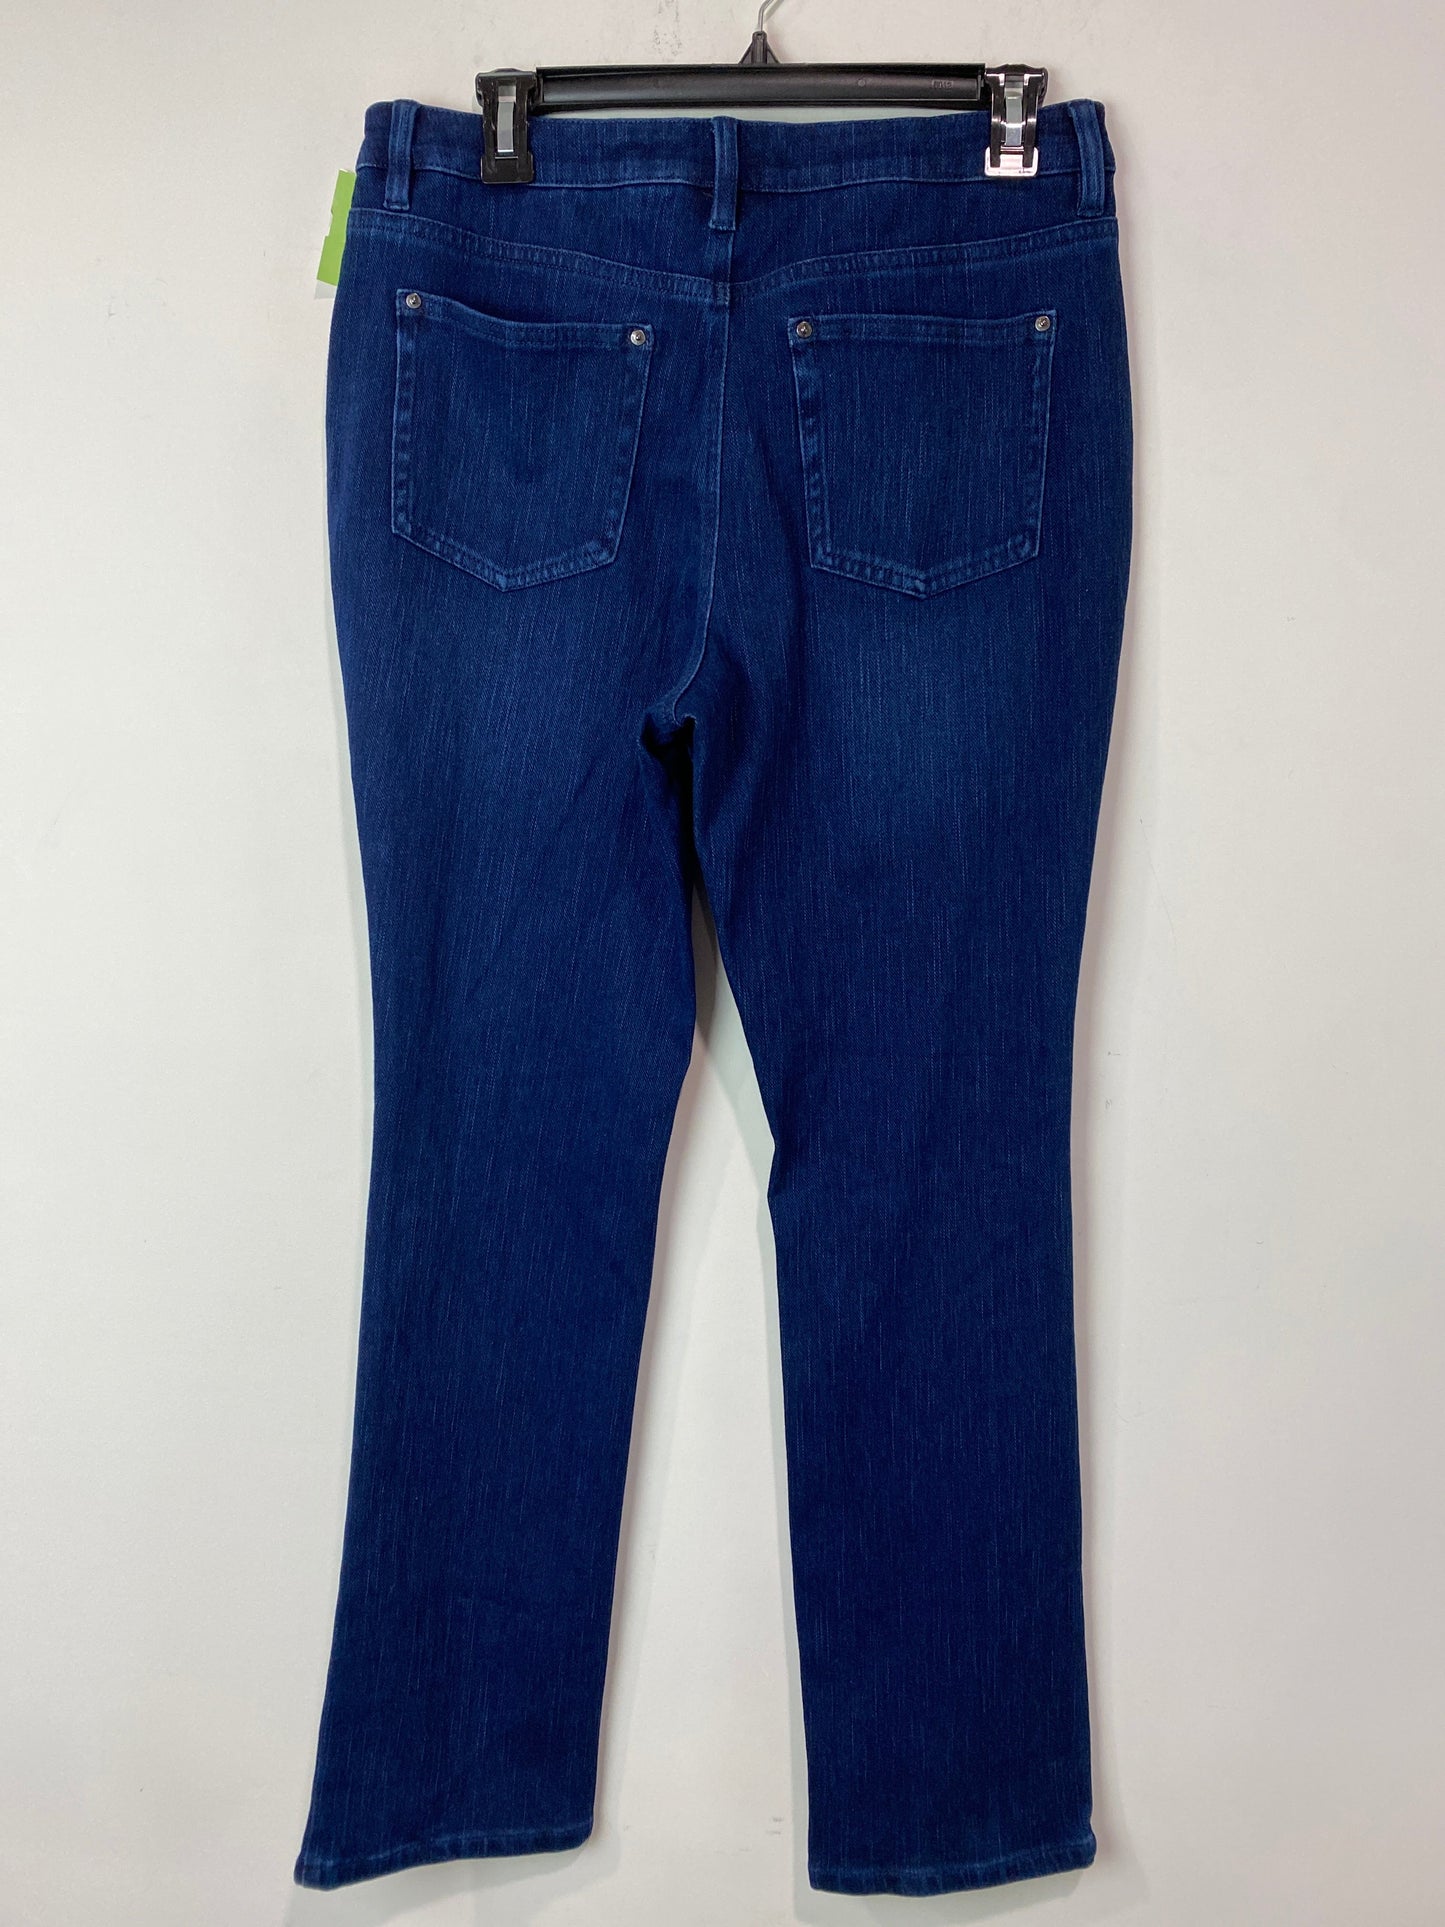 Jeans Straight By Belle By Kim Gravel  Size: 8